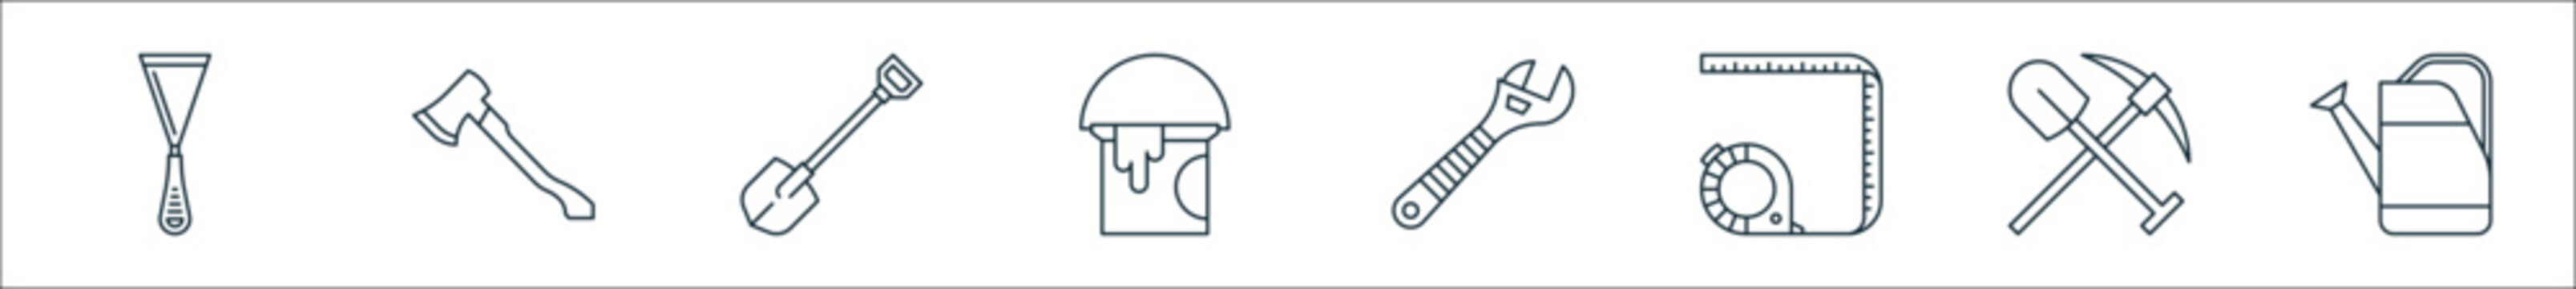 outline set of construction tools line icons. linear vector icons such as spatula, axe, shovel, paint bucket, wrench, measure tape, mining, watering can